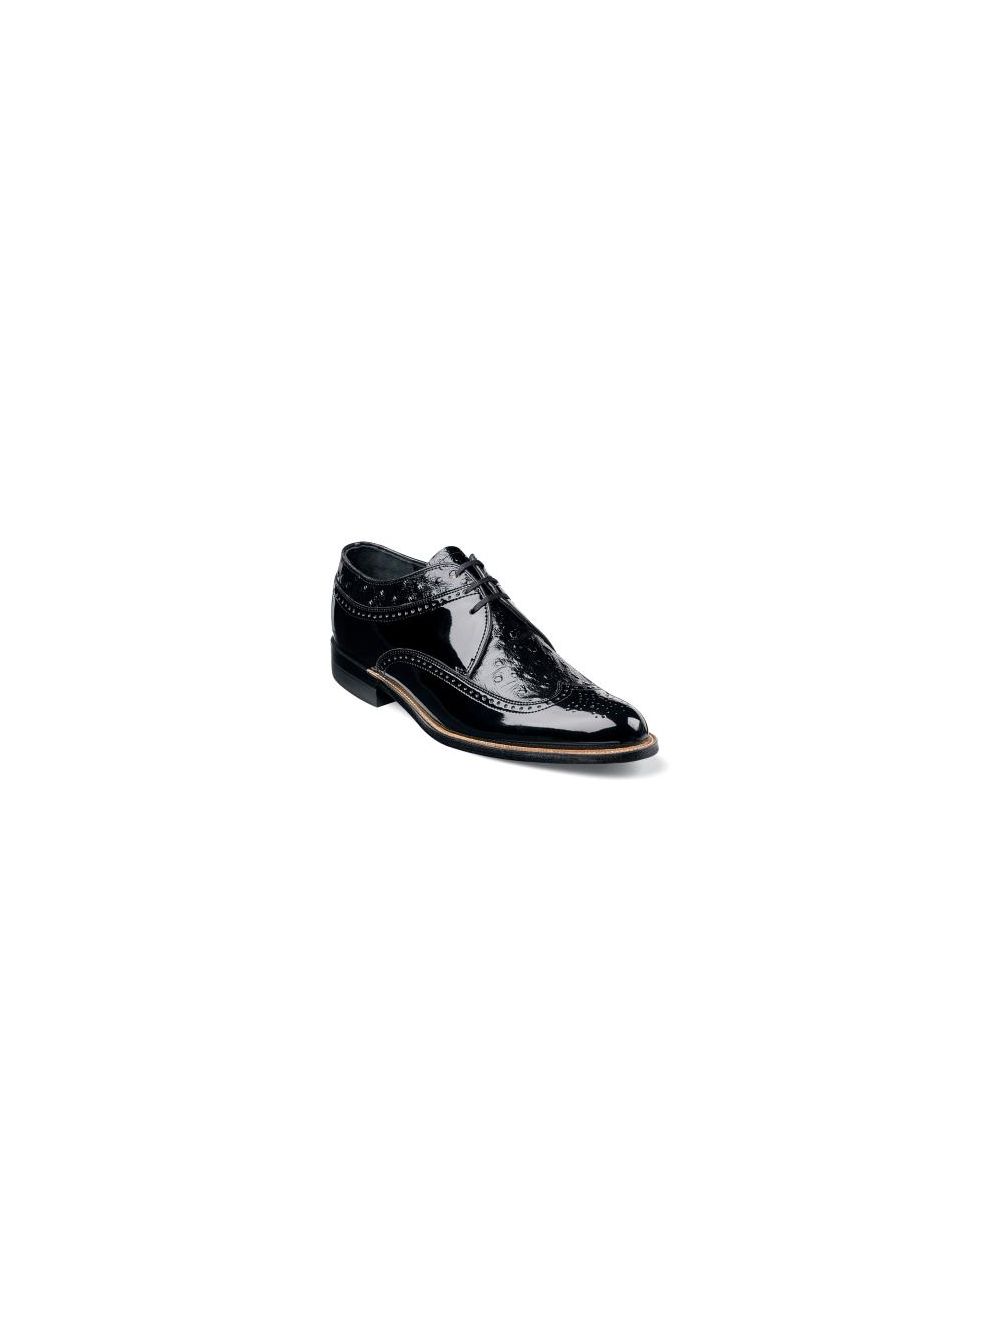 Stacy Adams Men's dress Shoes Dayton Black & White Wing Tip Oxford Leather 